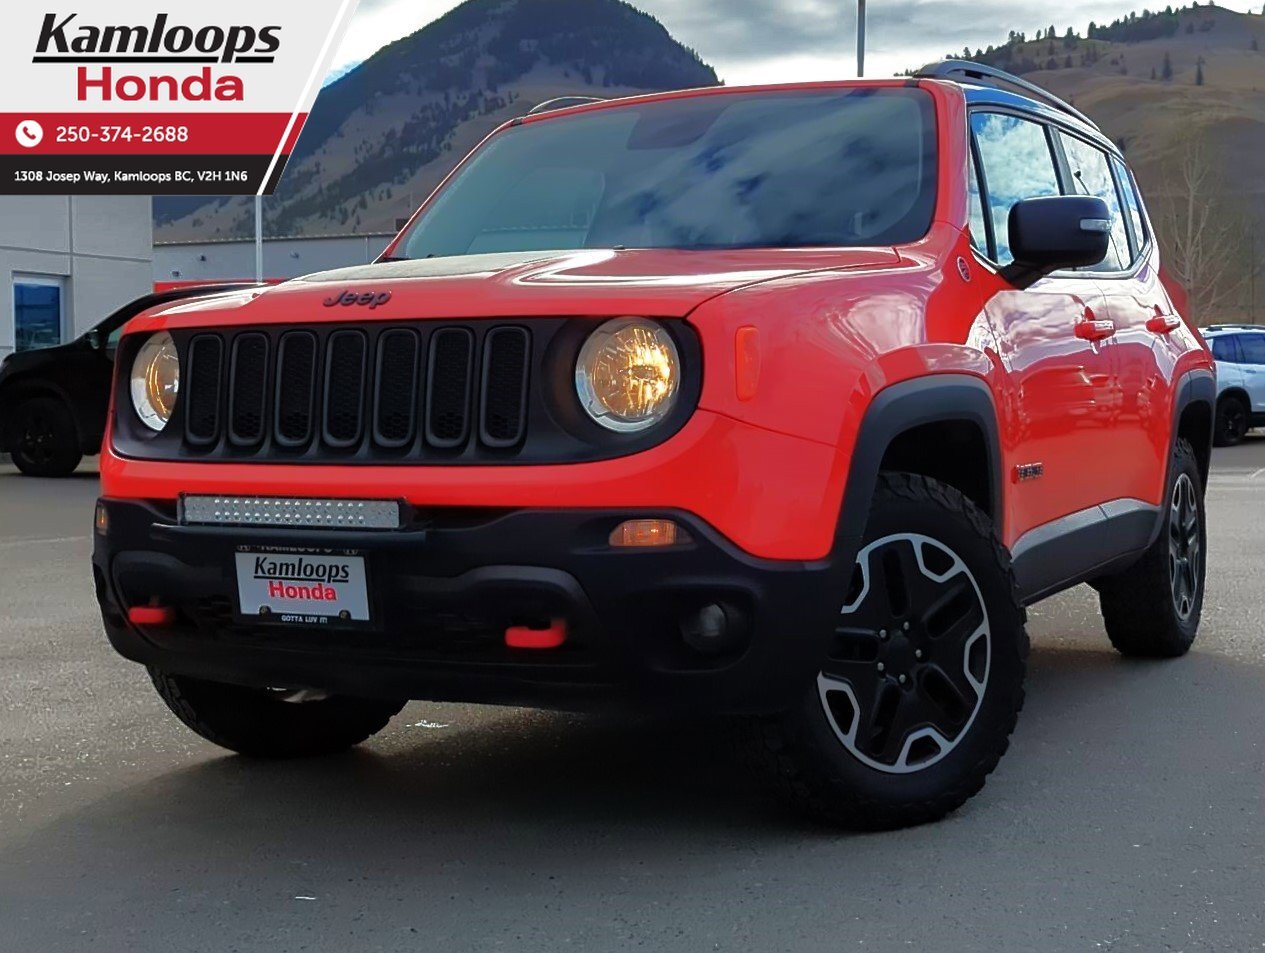 2017 Jeep Renegade Trailhawk - LOW KMS | REMOTE START | HEATED SEATS